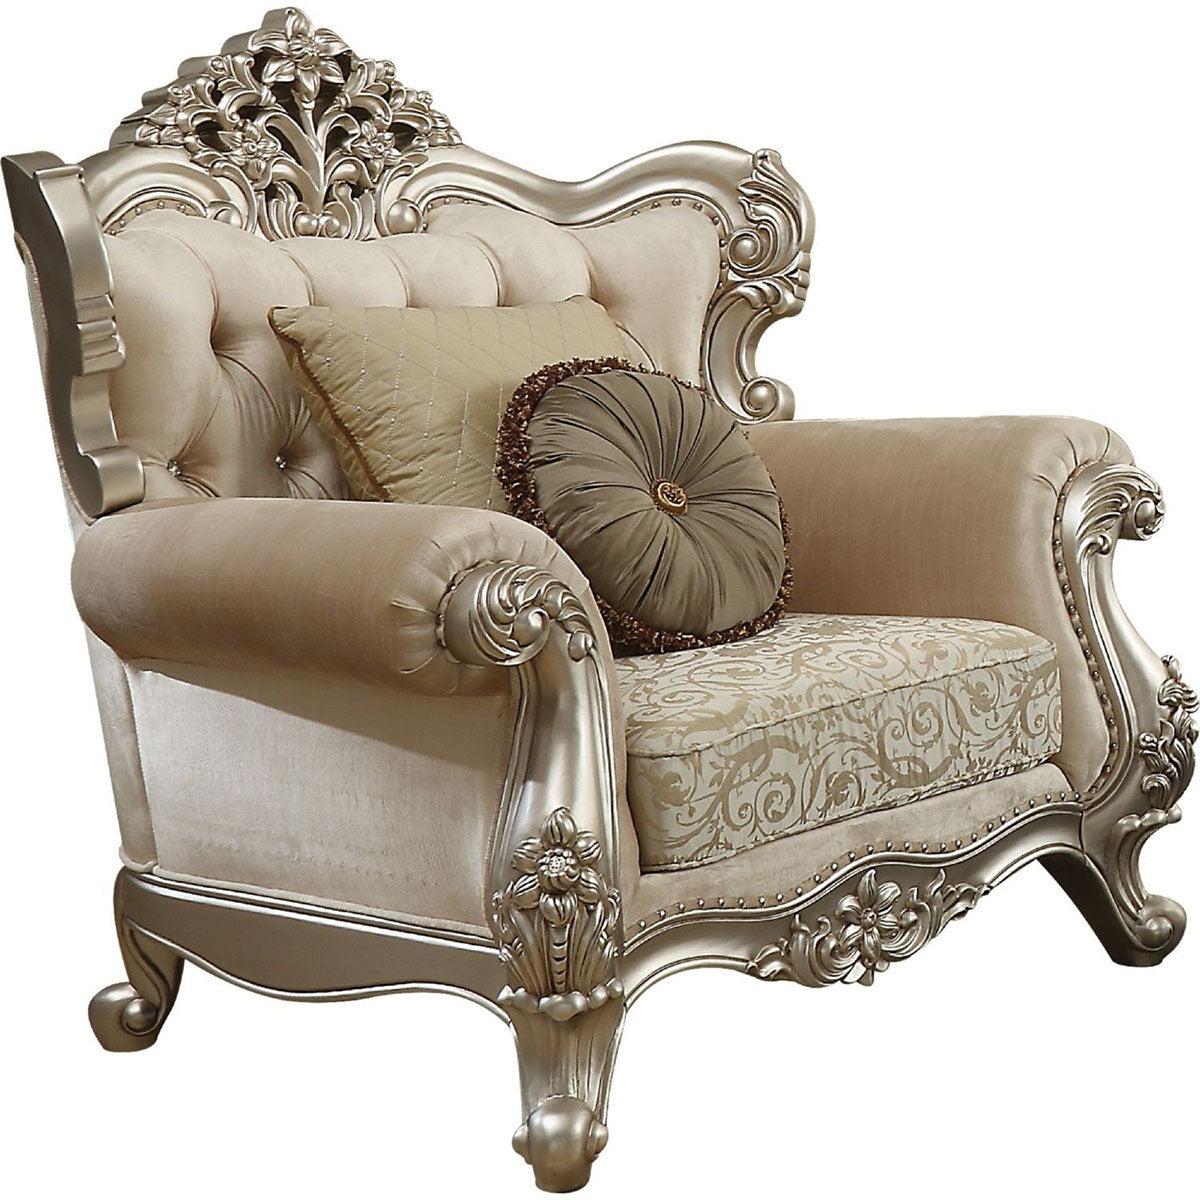 Acme Furniture Bently Chair with 2 Pillows in Champagne 50662  Las Vegas Furniture Stores